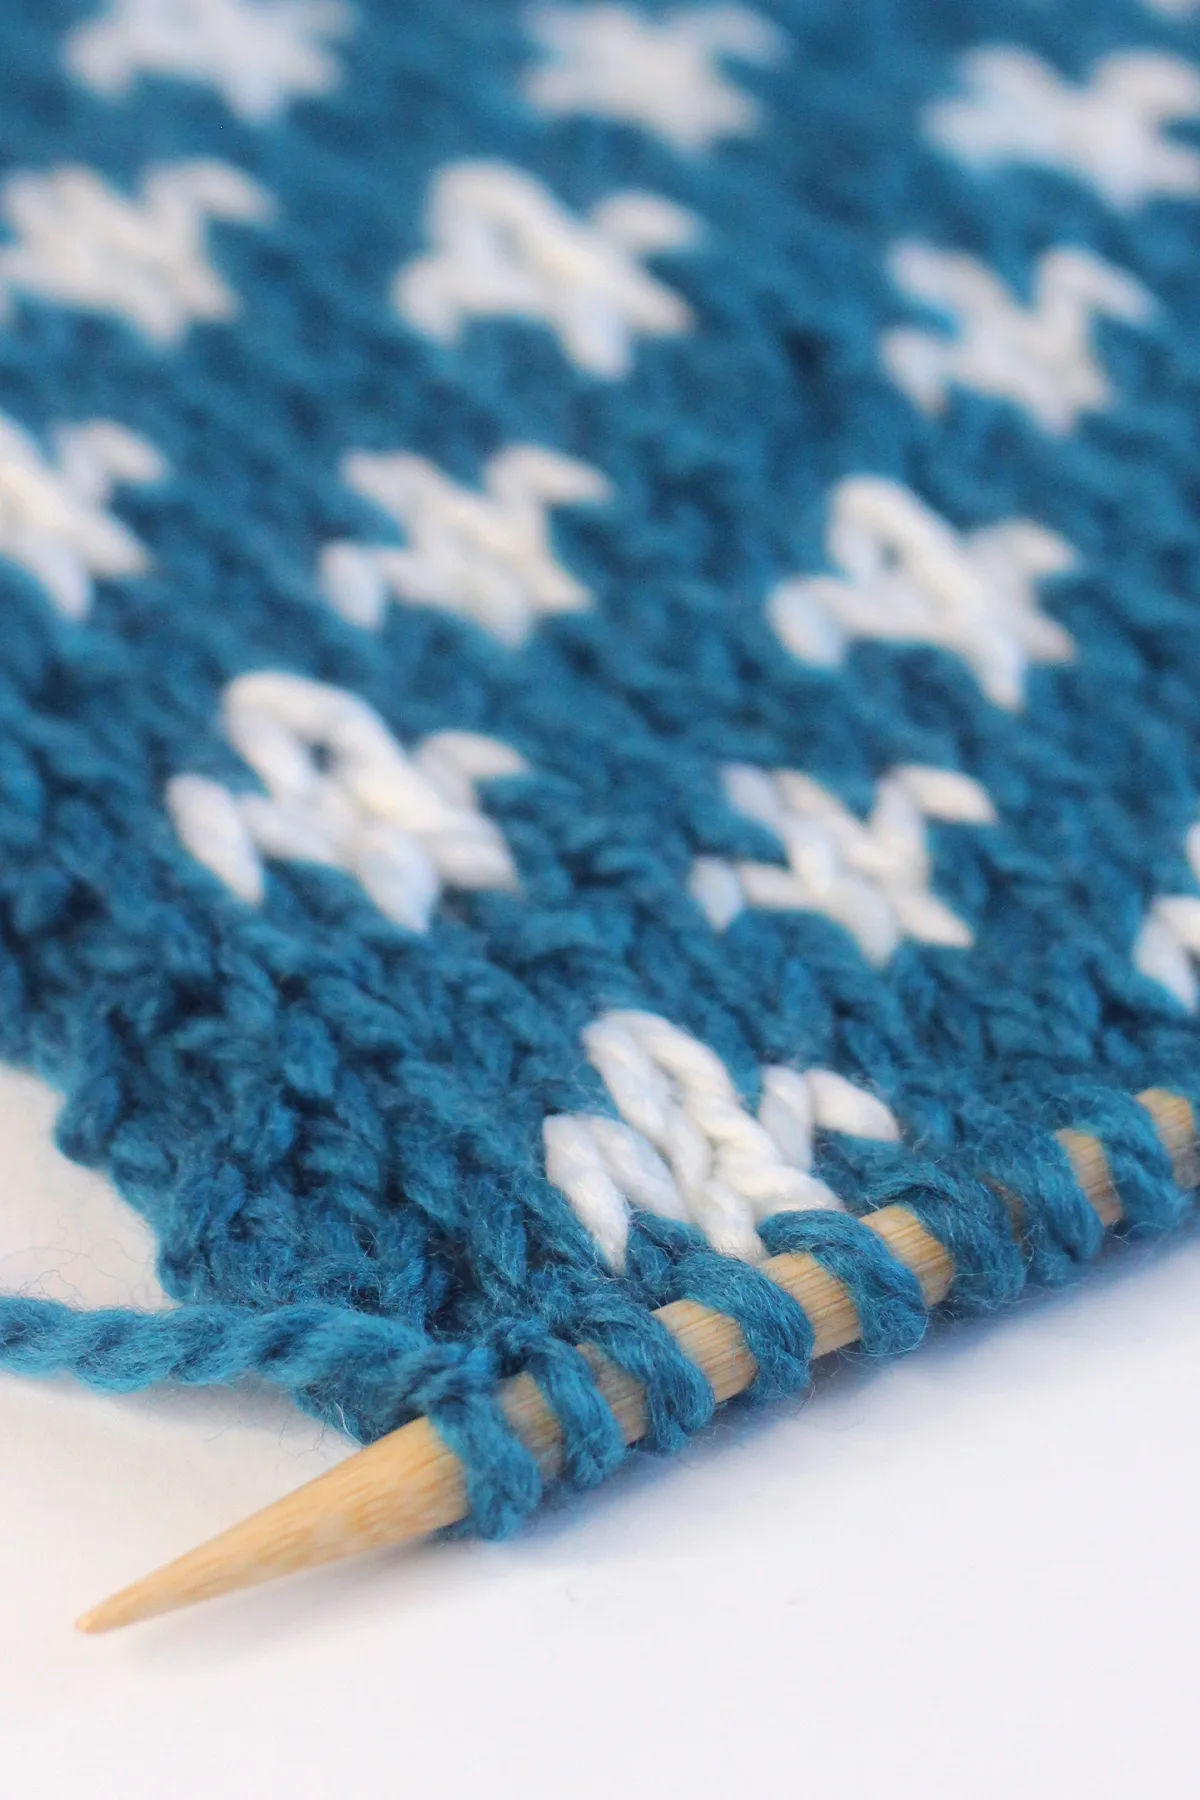 Close-up of Fleur de Lys knit stitch pattern in blue and white color yarn by Studio Knit.